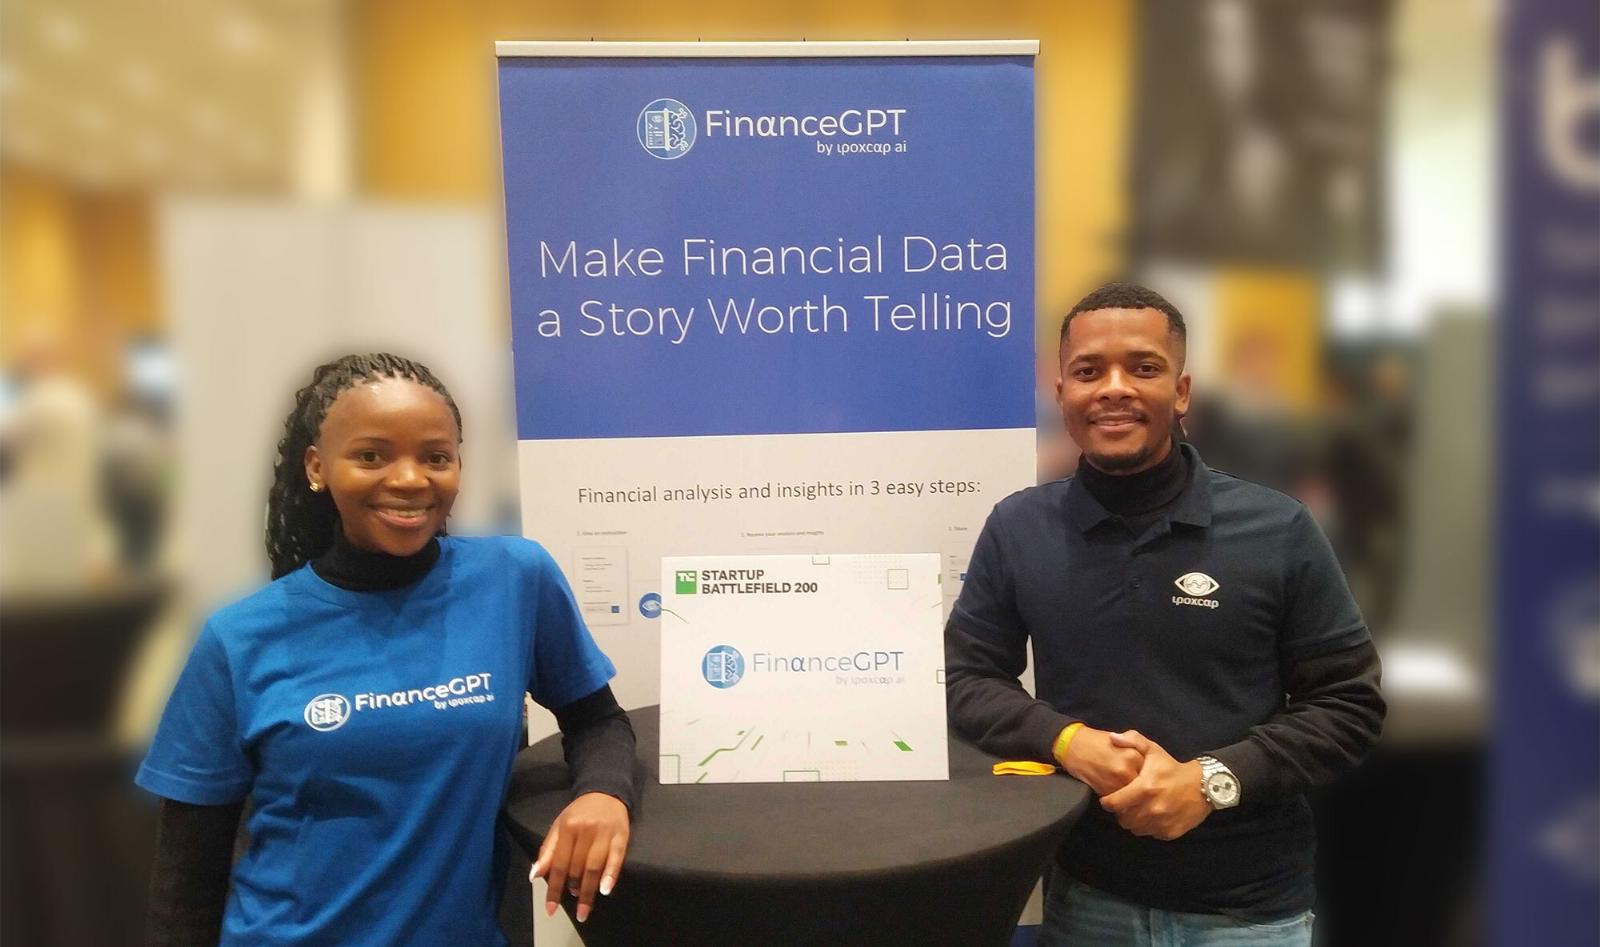 South Africa’s FinanceGPT simplifies financial analysis, set to interface in local languages